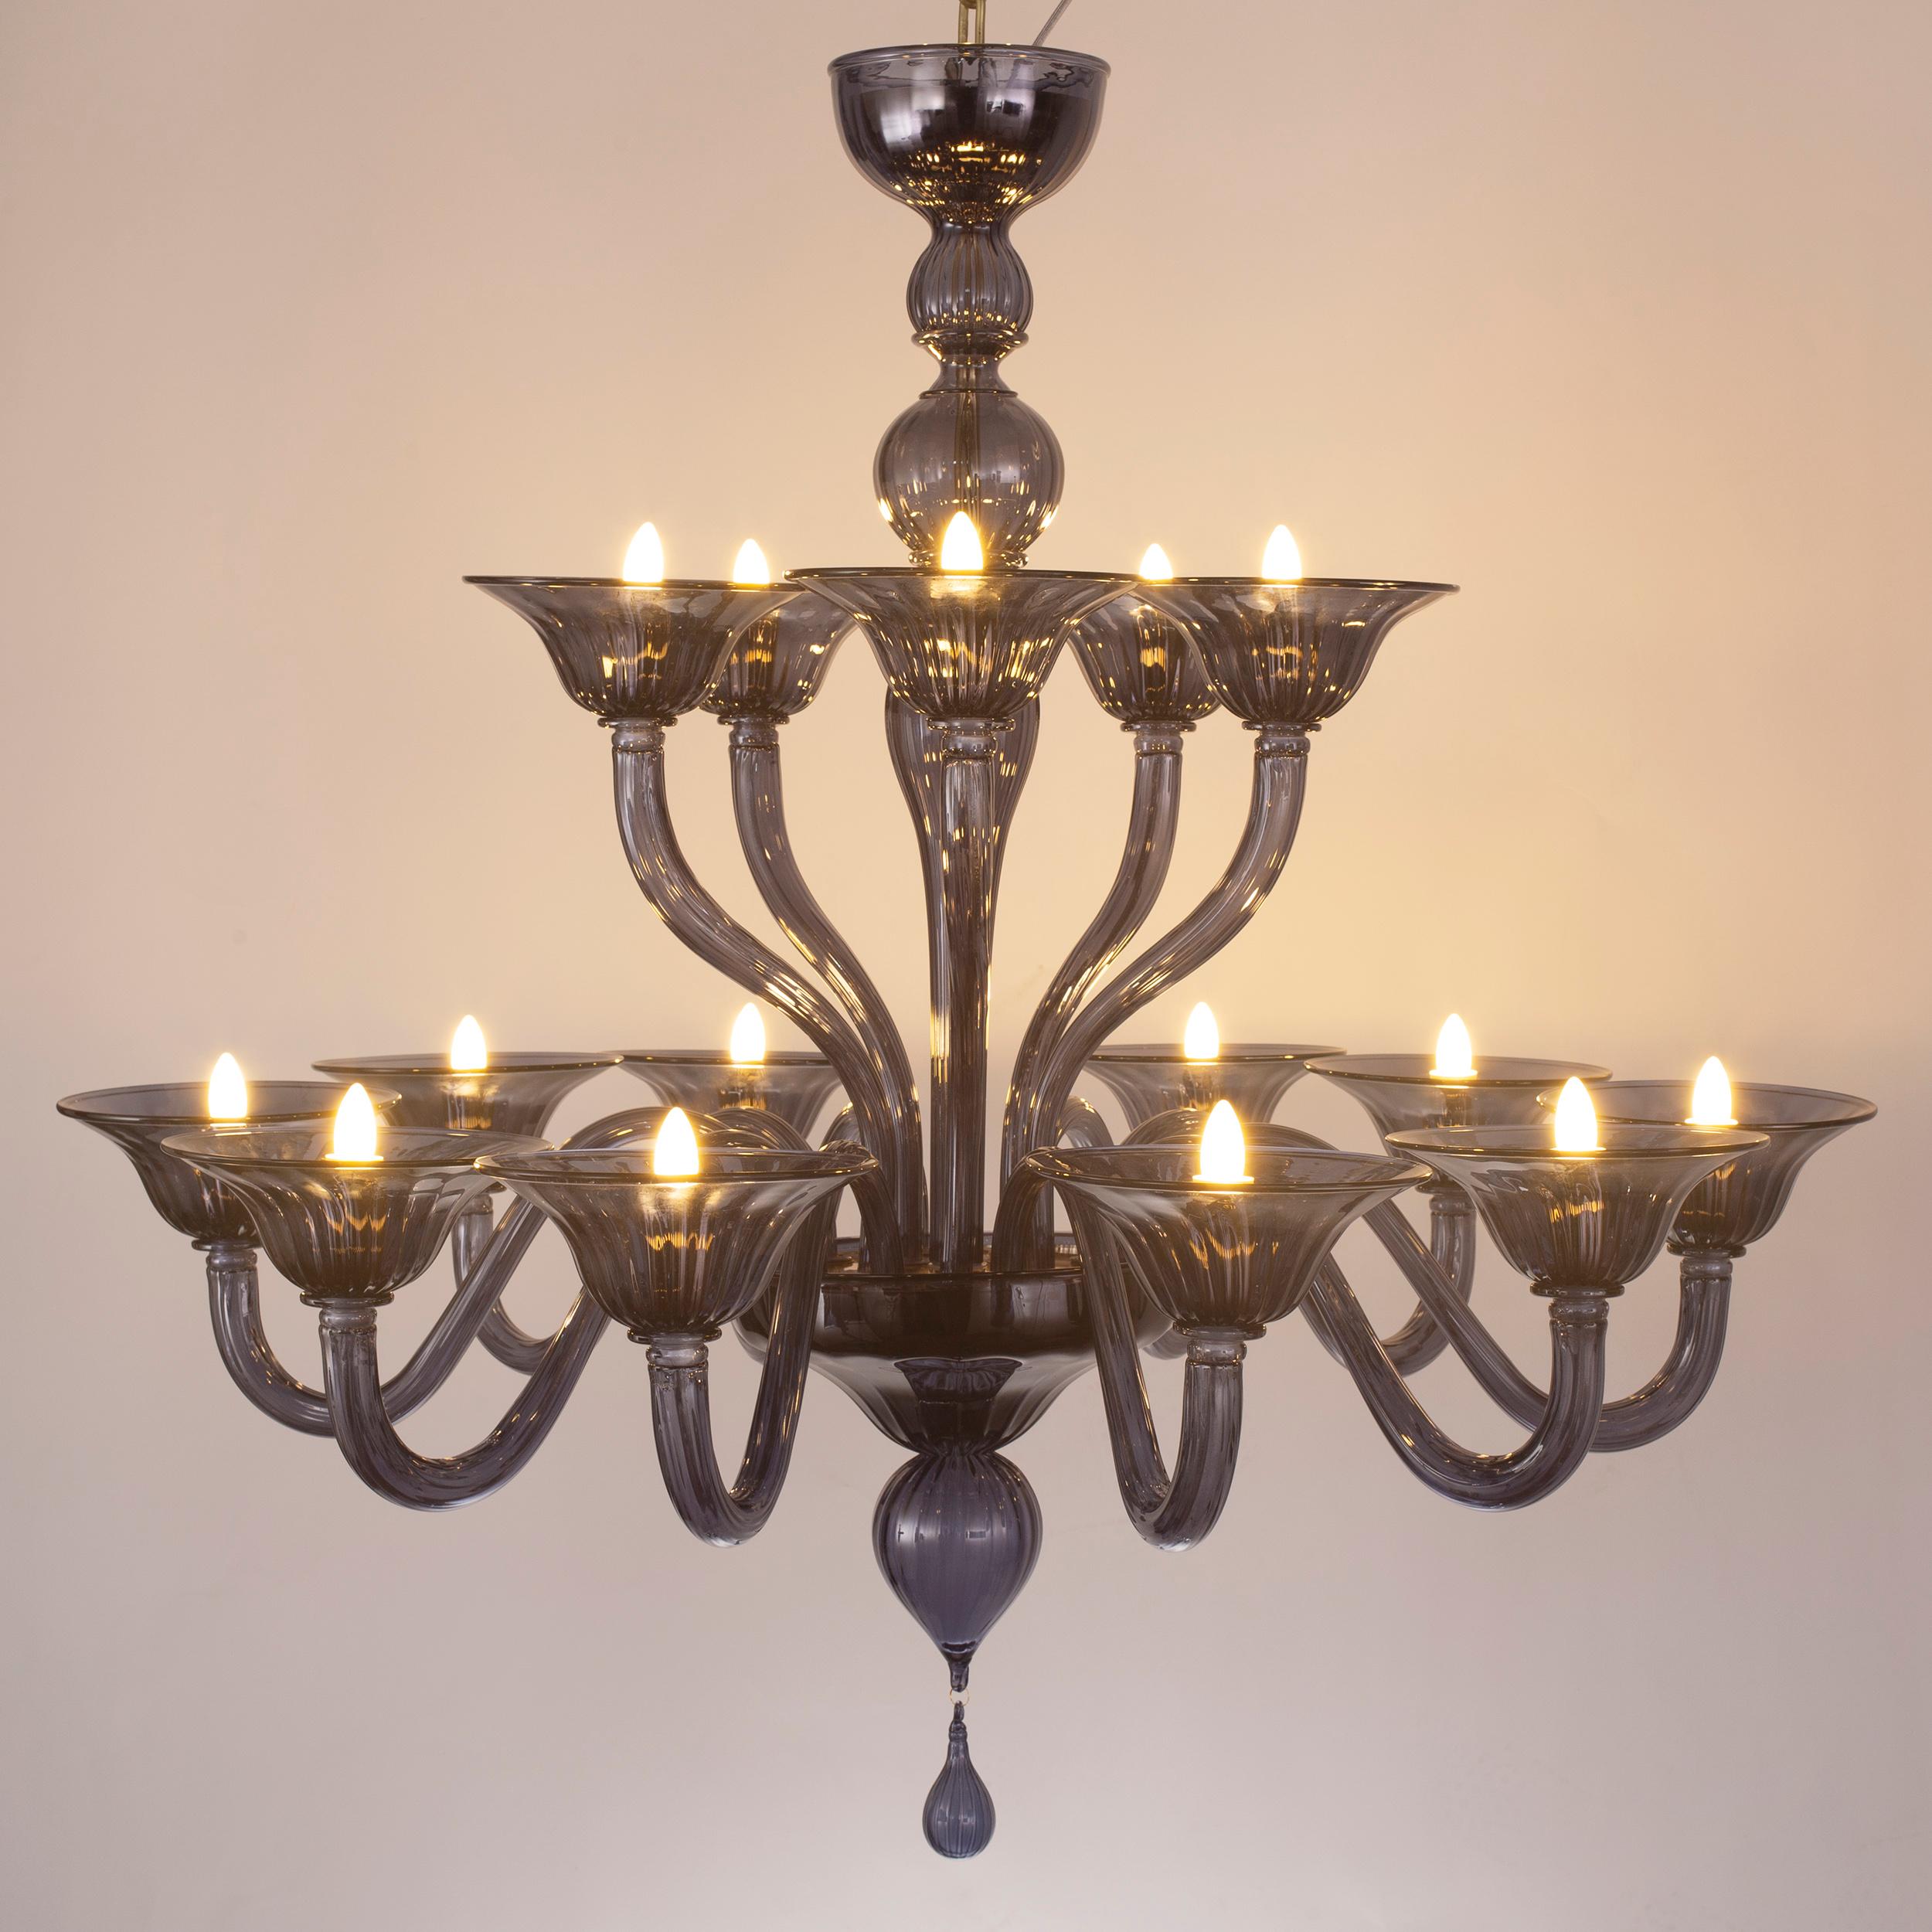 Italian 15 Arms Chandelier Slate Blue Artistic Murano Glass Simplicissimus by Multiforme For Sale